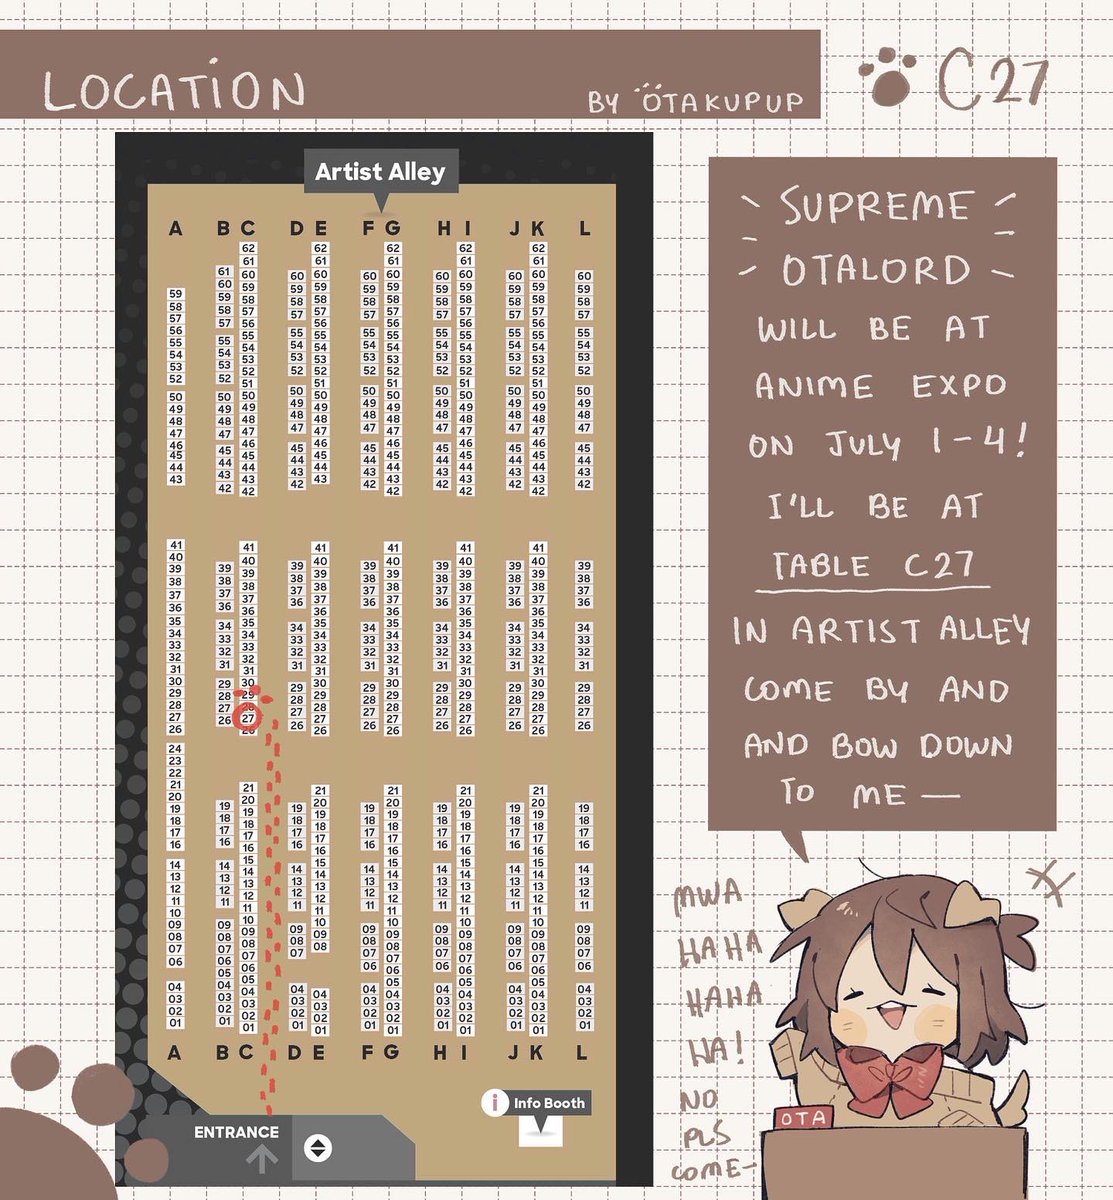 I didnt get to post my table location! I shall be at table c27 yo! ill also have freebies stickers too! My catalog is in my pinned tweet if you missed it! ☺️

The password for my ota sticker is:
"I bow my loyalty to the Otalord" :3
Bowing is optional LMAO 😂
#AX2022ArtistAlley 